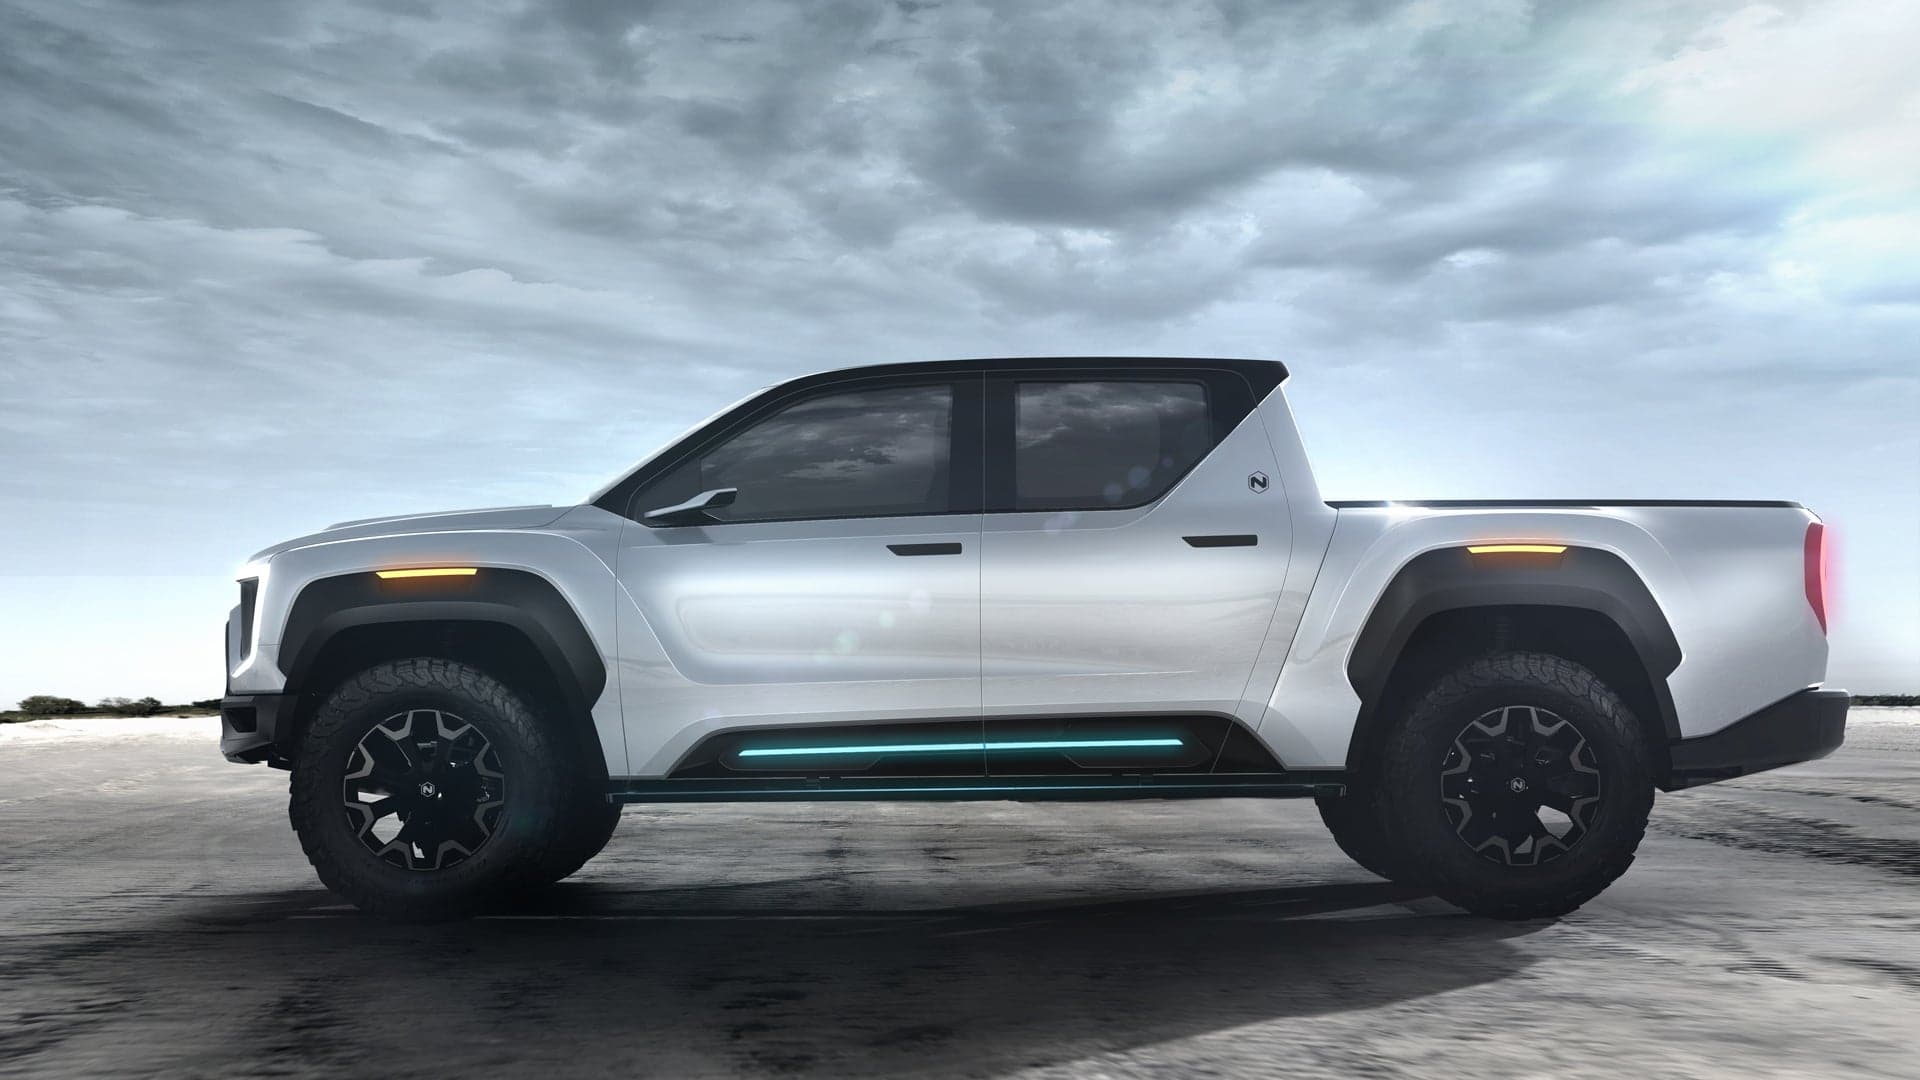 Electric Truck Startup Nikola Refutes Fraud Allegations, but This Fight Is Just Getting Started